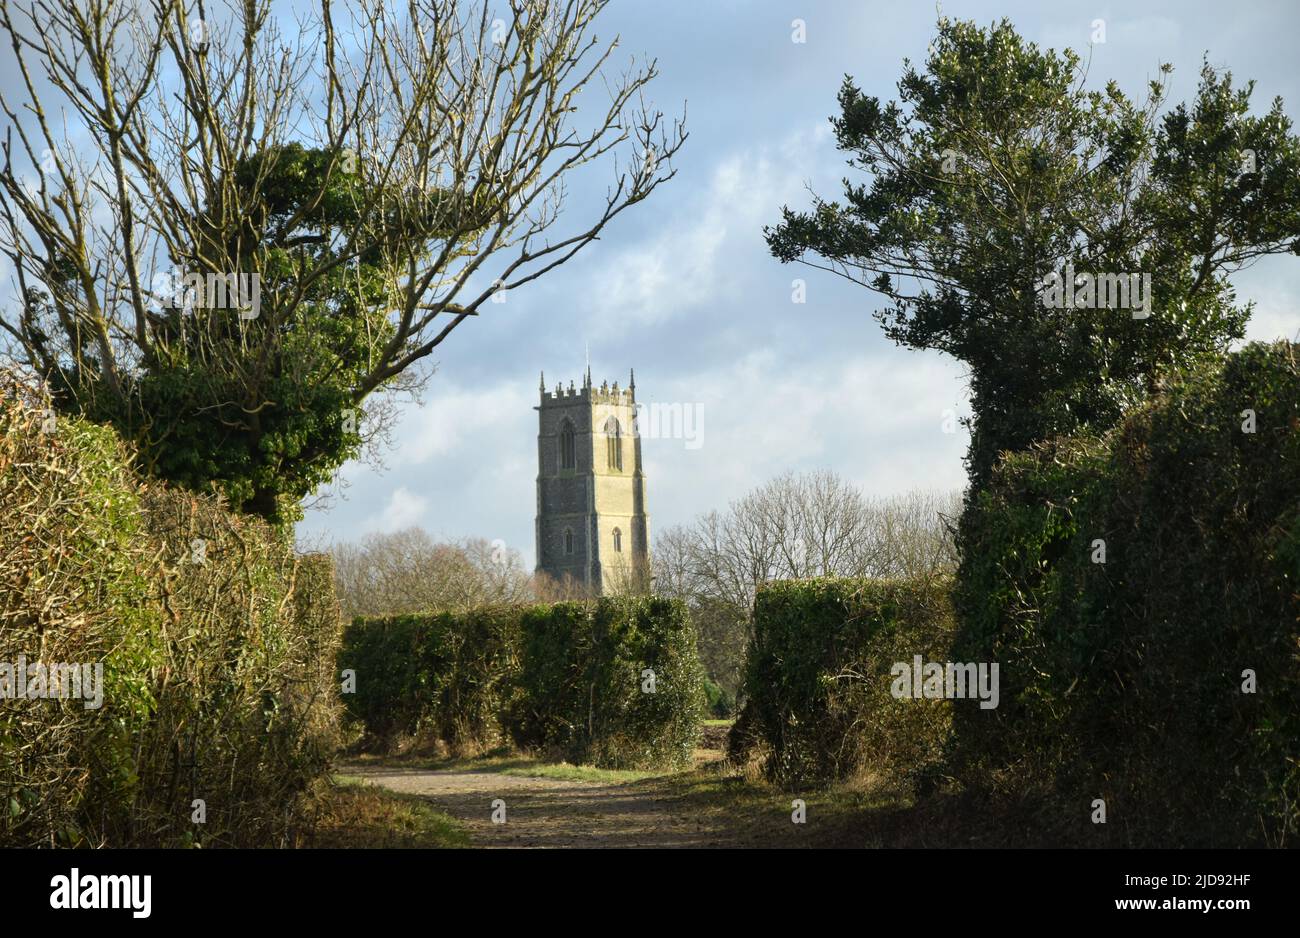 hedges, road, trees and church tower in the background, suffolk, england Stock Photo